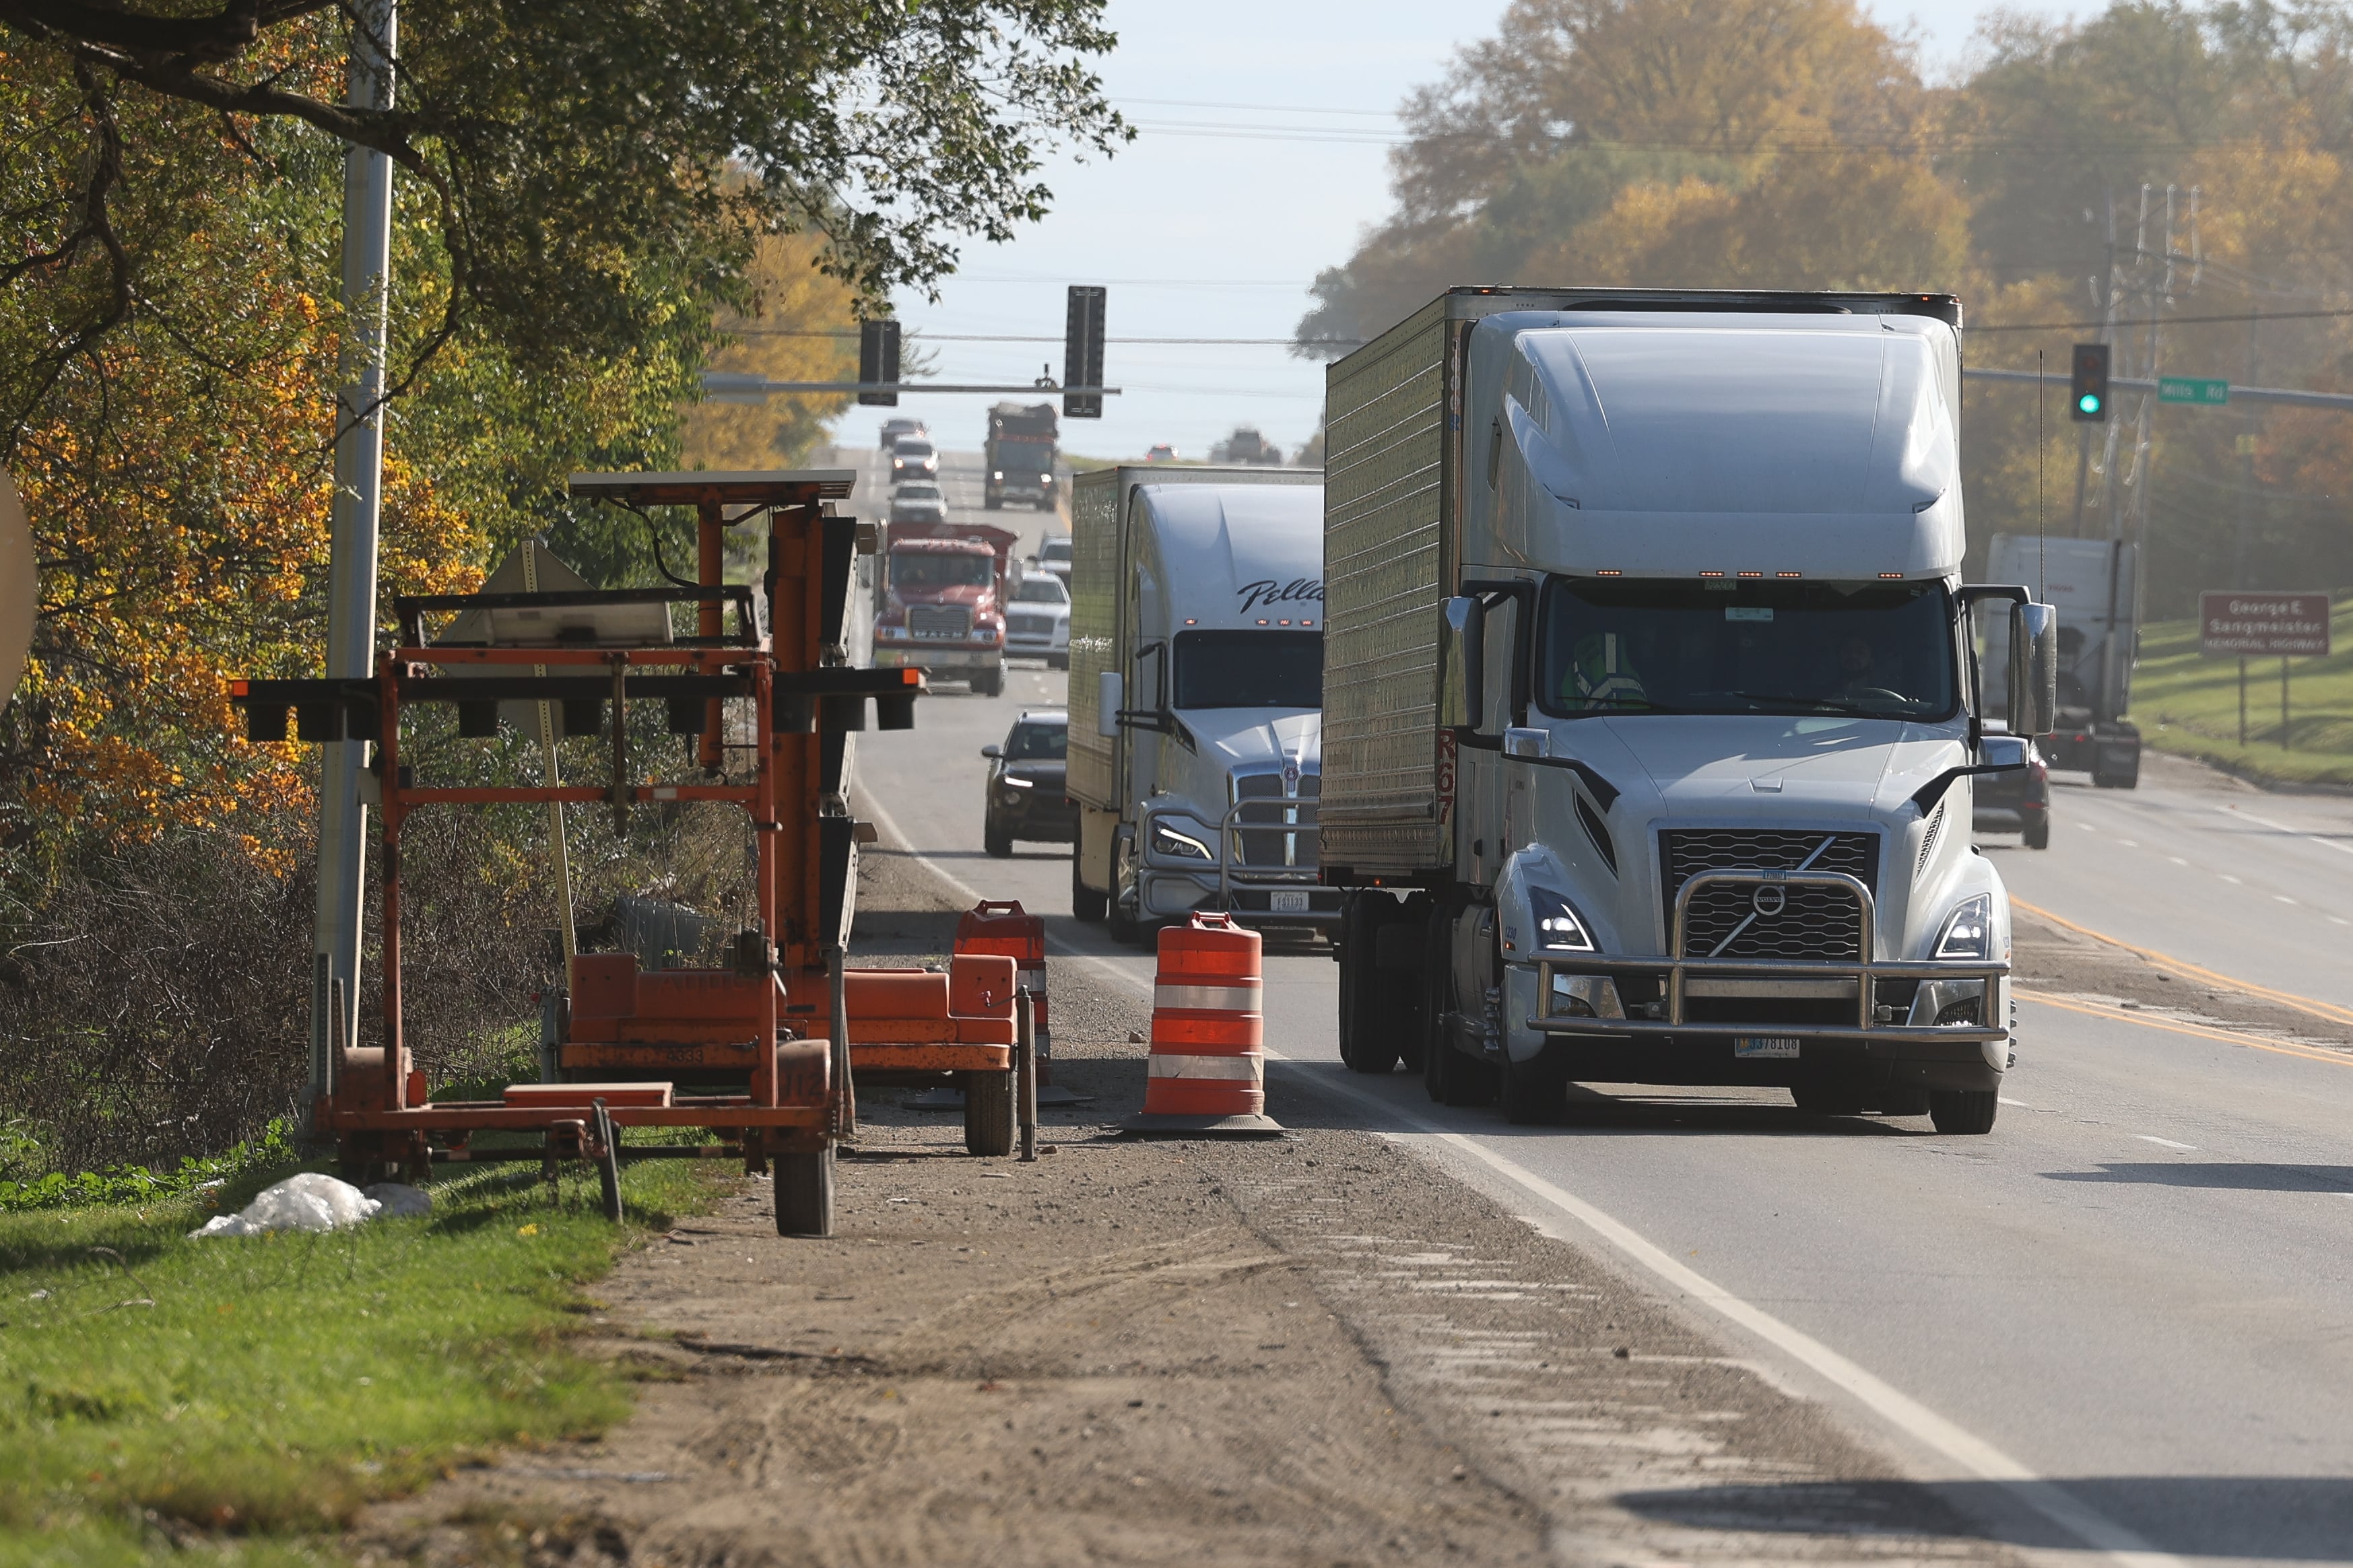 Joliet approves detection system to monitor stray trucks